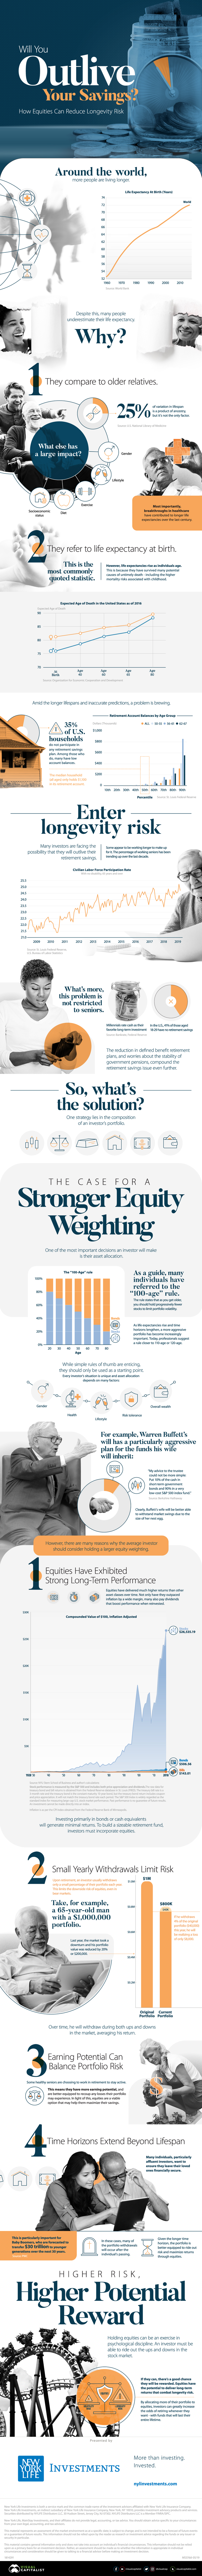 How Equities Can Reduce Longevity Risk